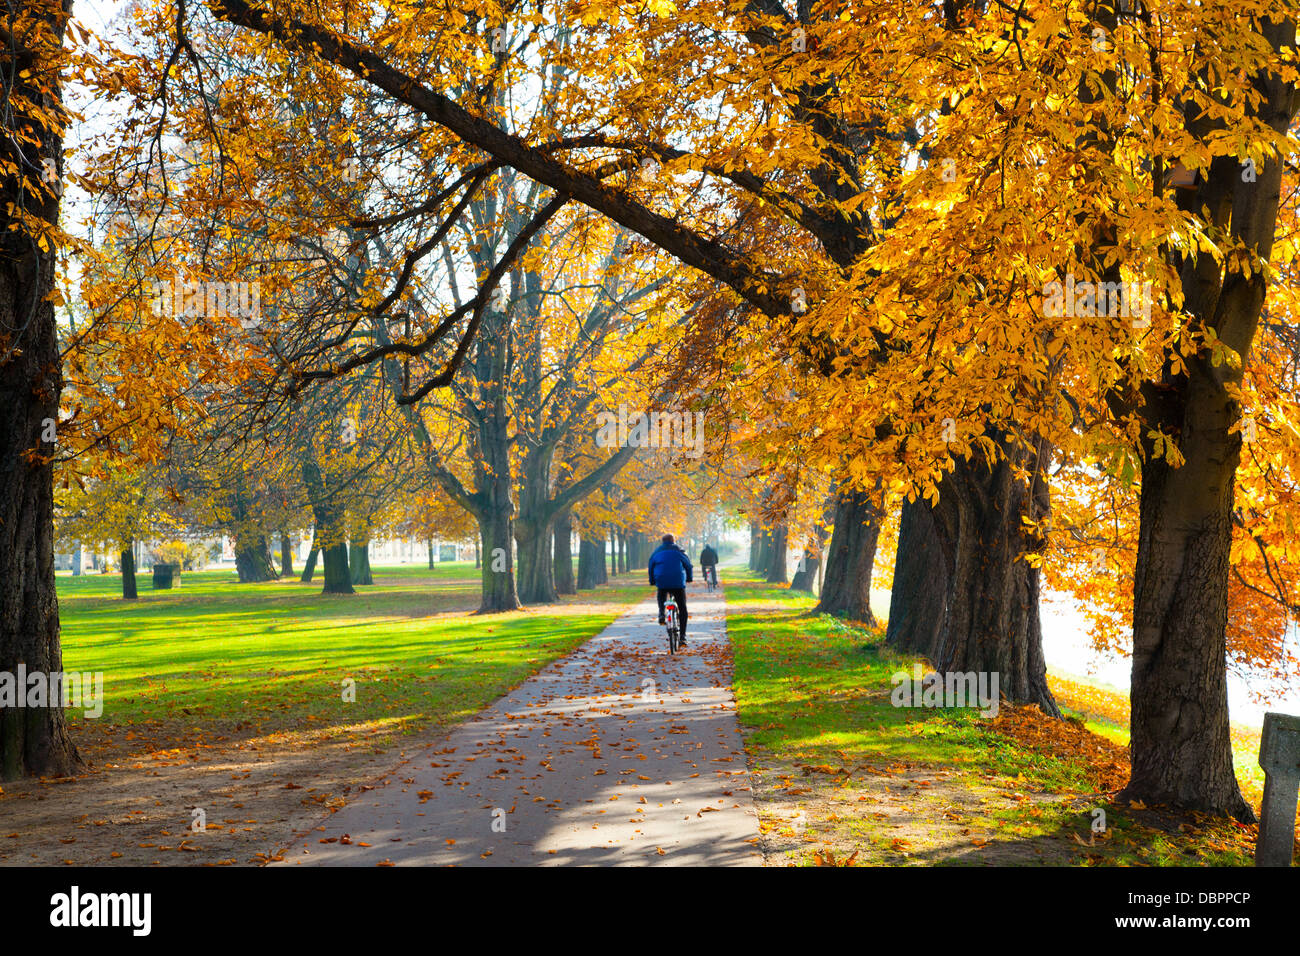 Pedestrian walkway for exercise lined up with beautiful fall trees Stock Photo